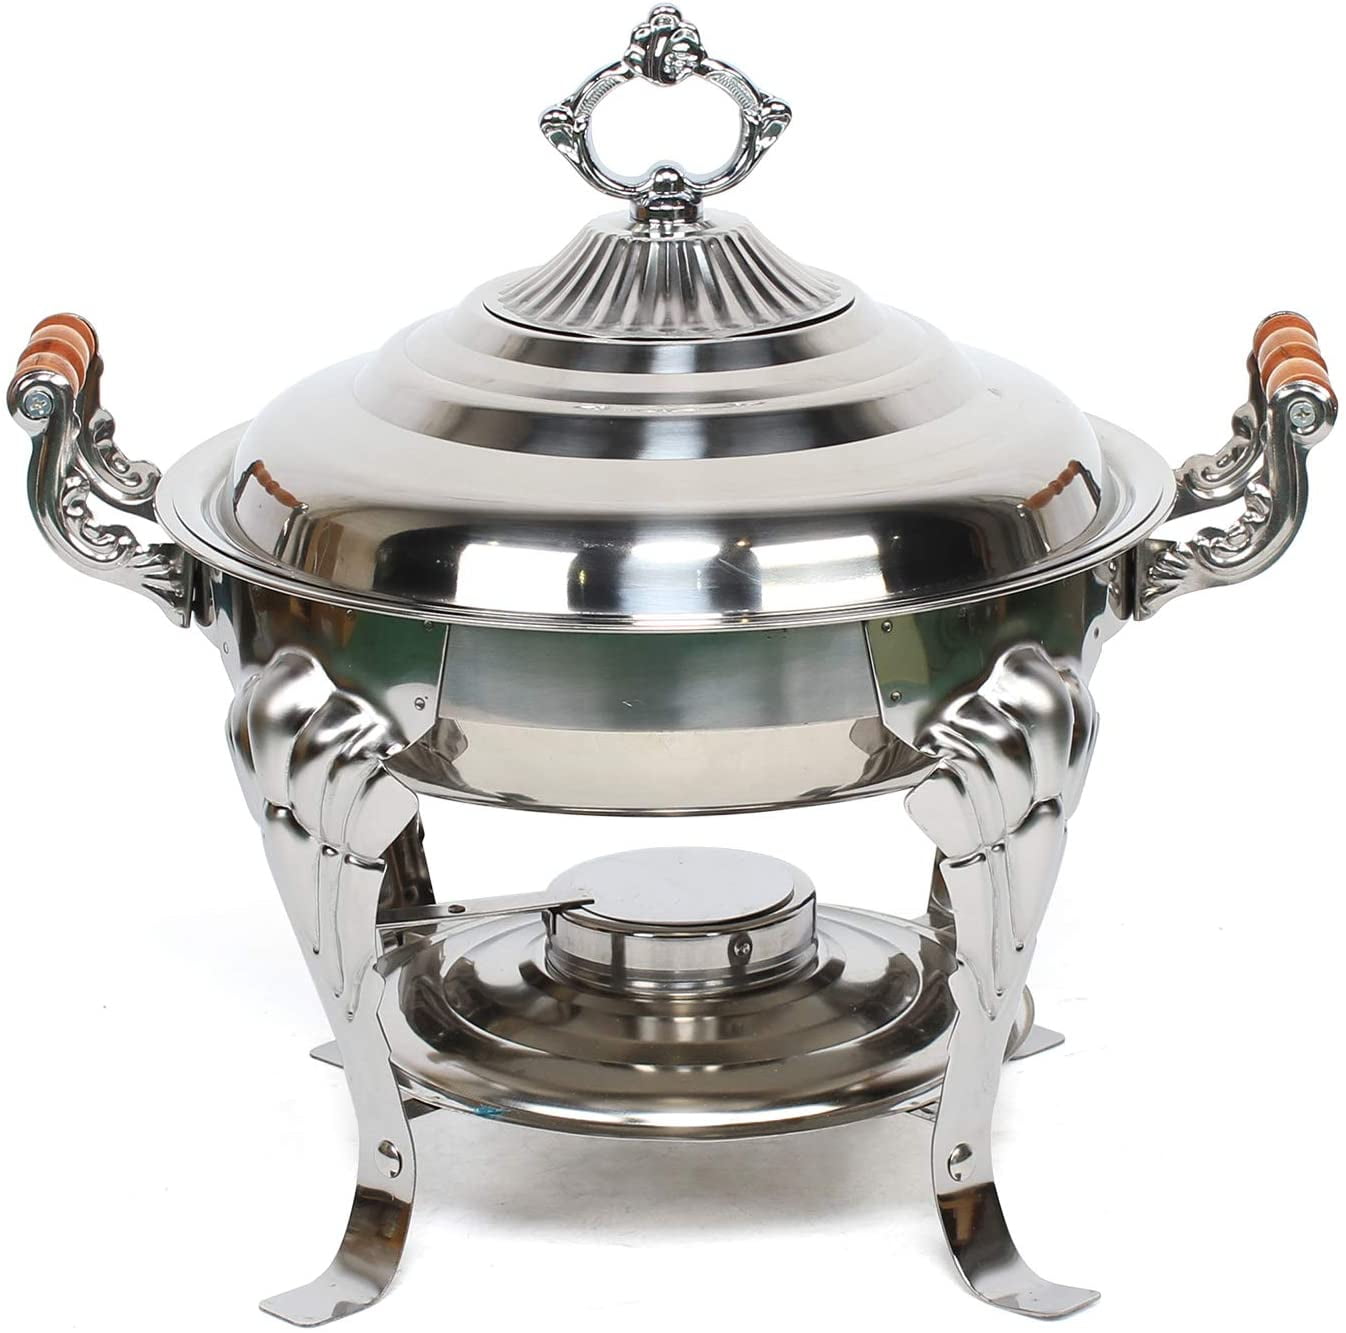 Large Chafing Dish 9-Liter 9.5 Quart Stainless Steel Buffet Catering Restaurant 